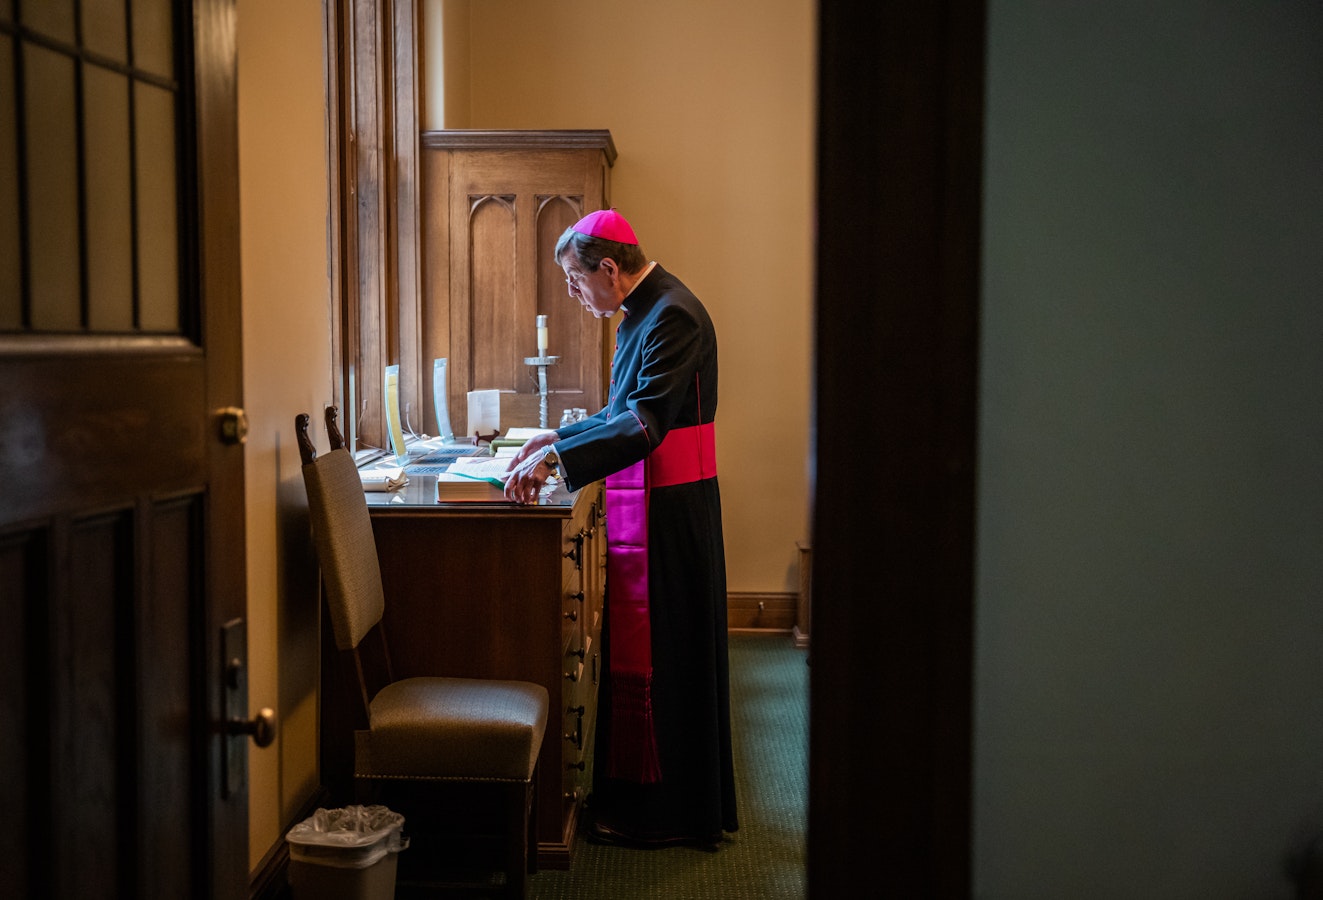 Archbishop Vigneron takes a quiet moment to himself in the sacristy at Sacred Heart Major Seminary while preparing to celebrate the seminary's commencement Mass on April 29, 2023. (Valaurian Waller | Detroit Catholic)